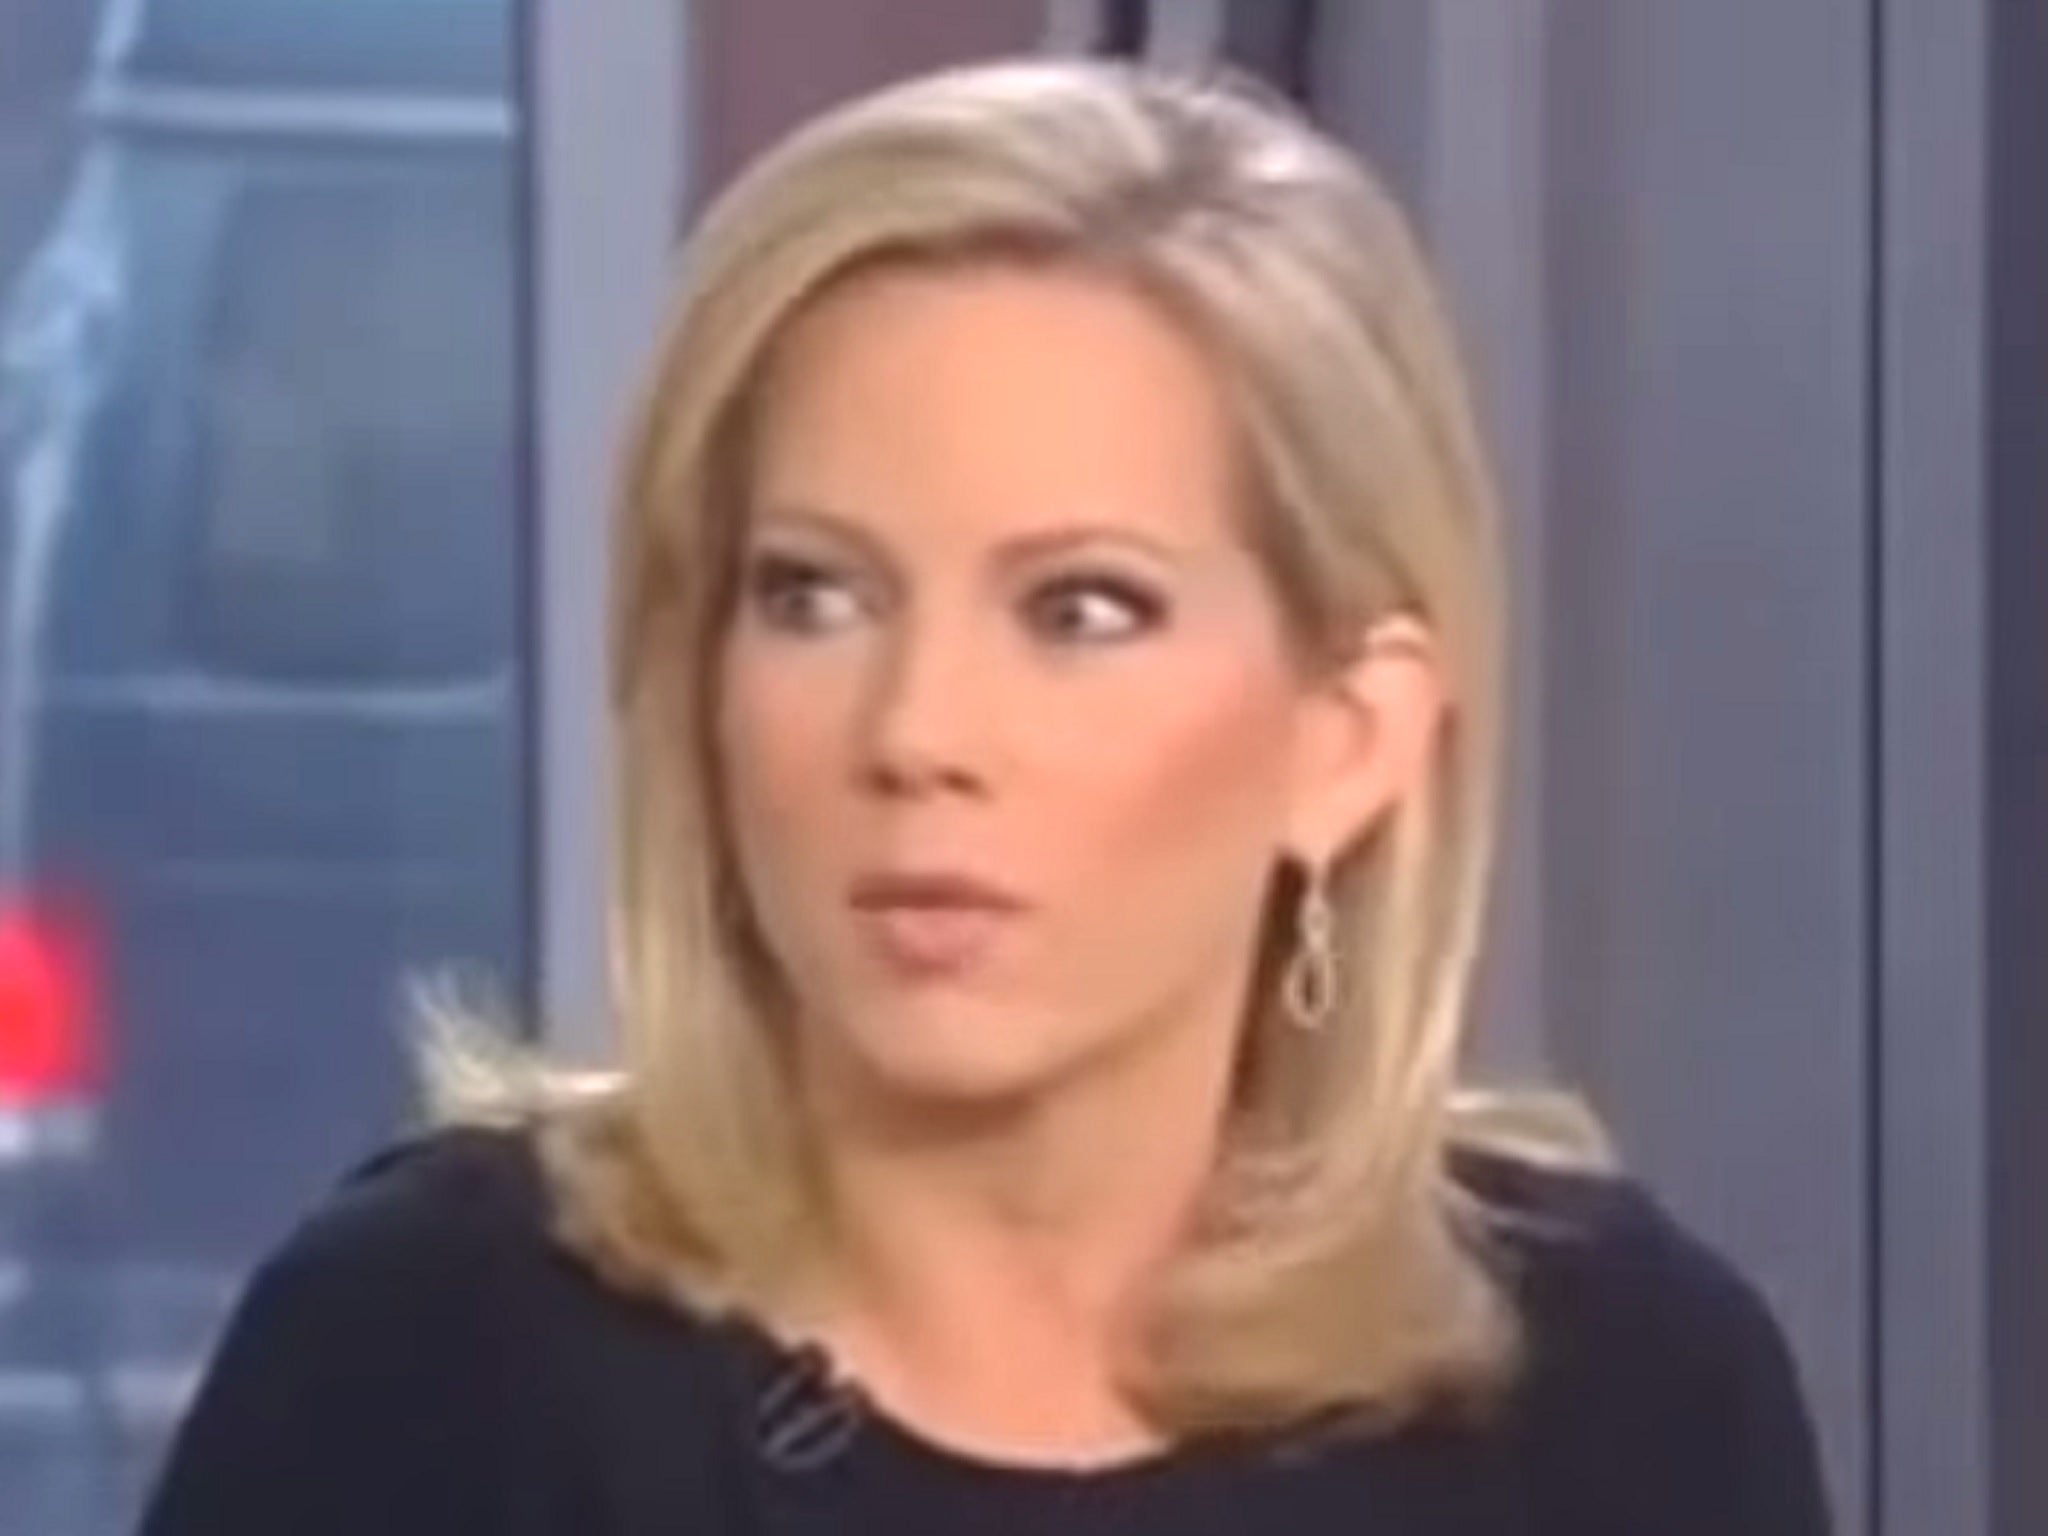 Shannon Bream asked how terrorists could be identified if their faces were covered